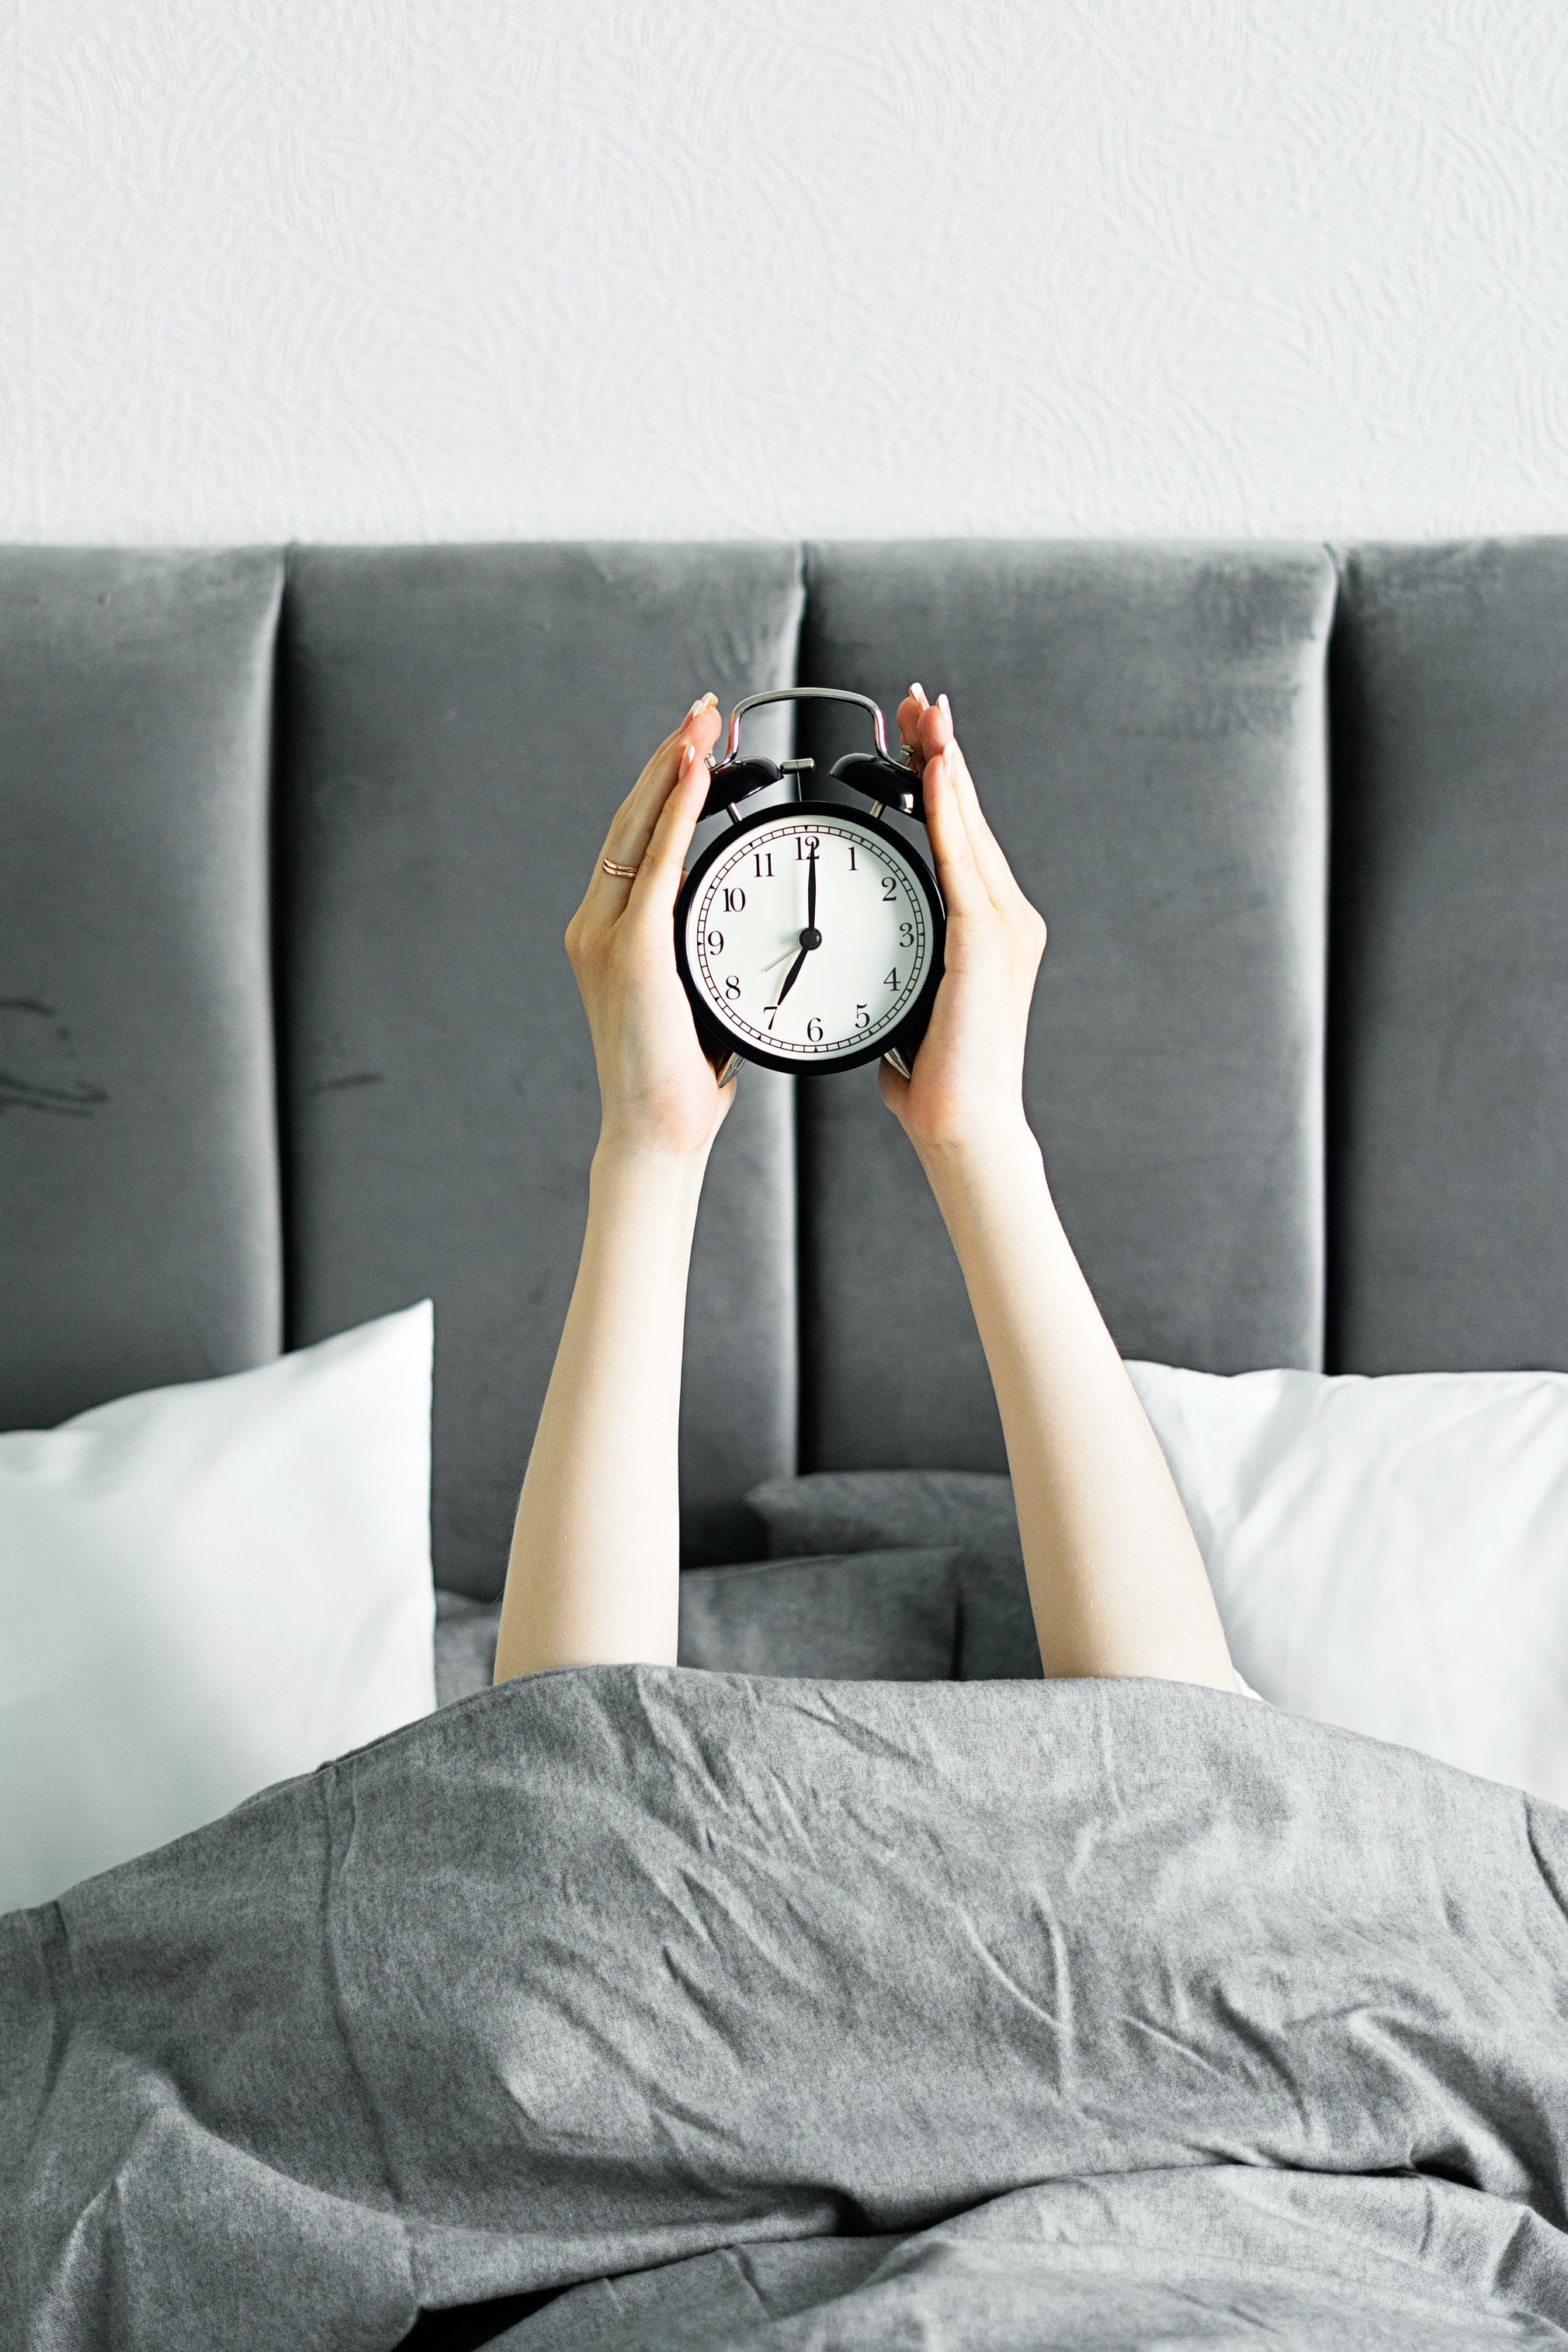 Alarm Clock: How long to see the benefits of marine collagen?